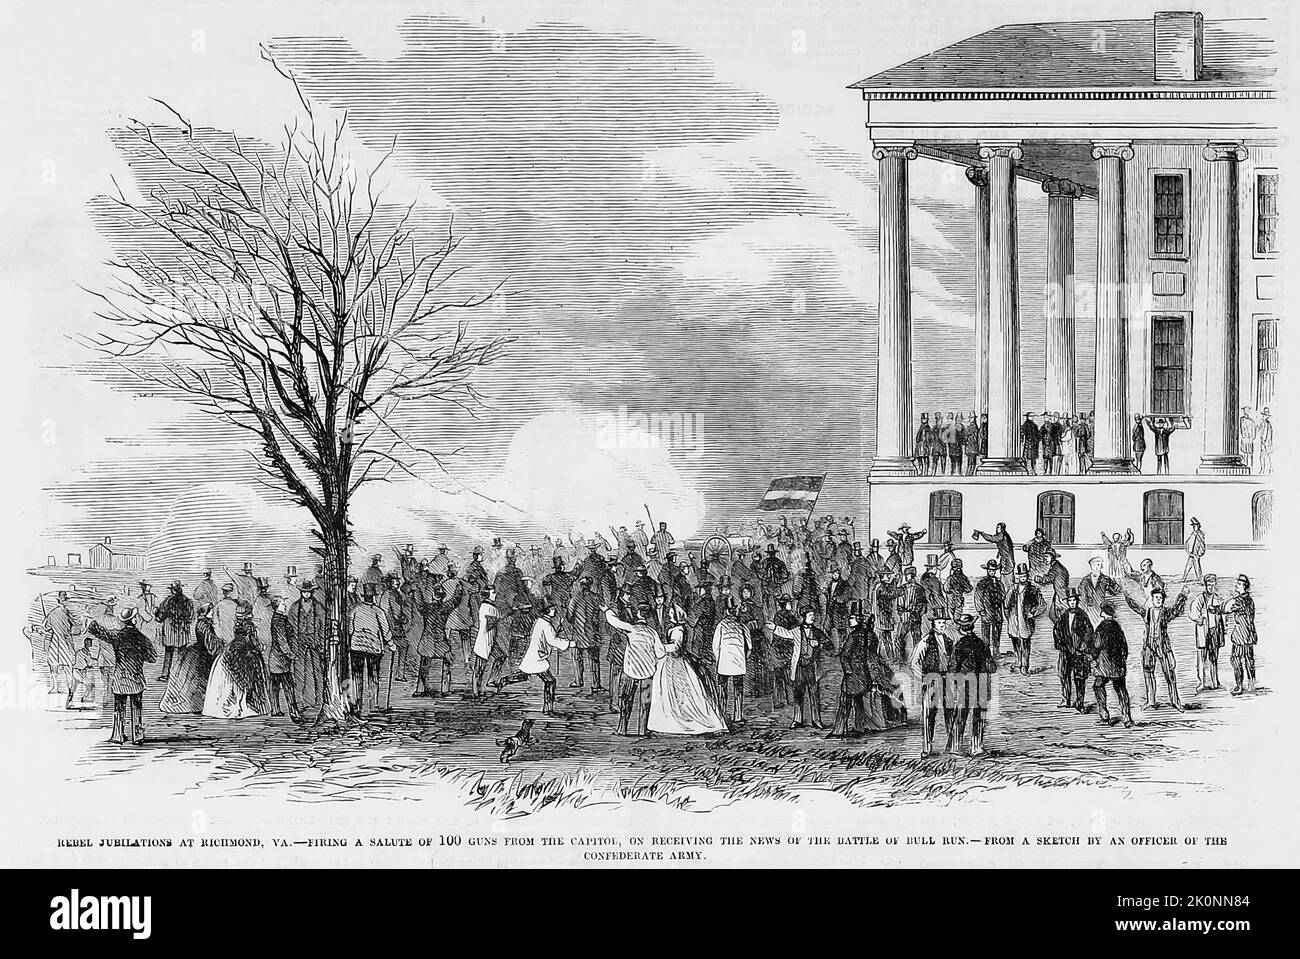 Rebel jubilations at Richmond, Virginia - Firing a salute of 100 guns from the Capitol, on receiving the news of the First Battle of Bull Run, July 1861. 19th century American Civil War illustration from Frank Leslie's Illustrated Newspaper Stock Photo